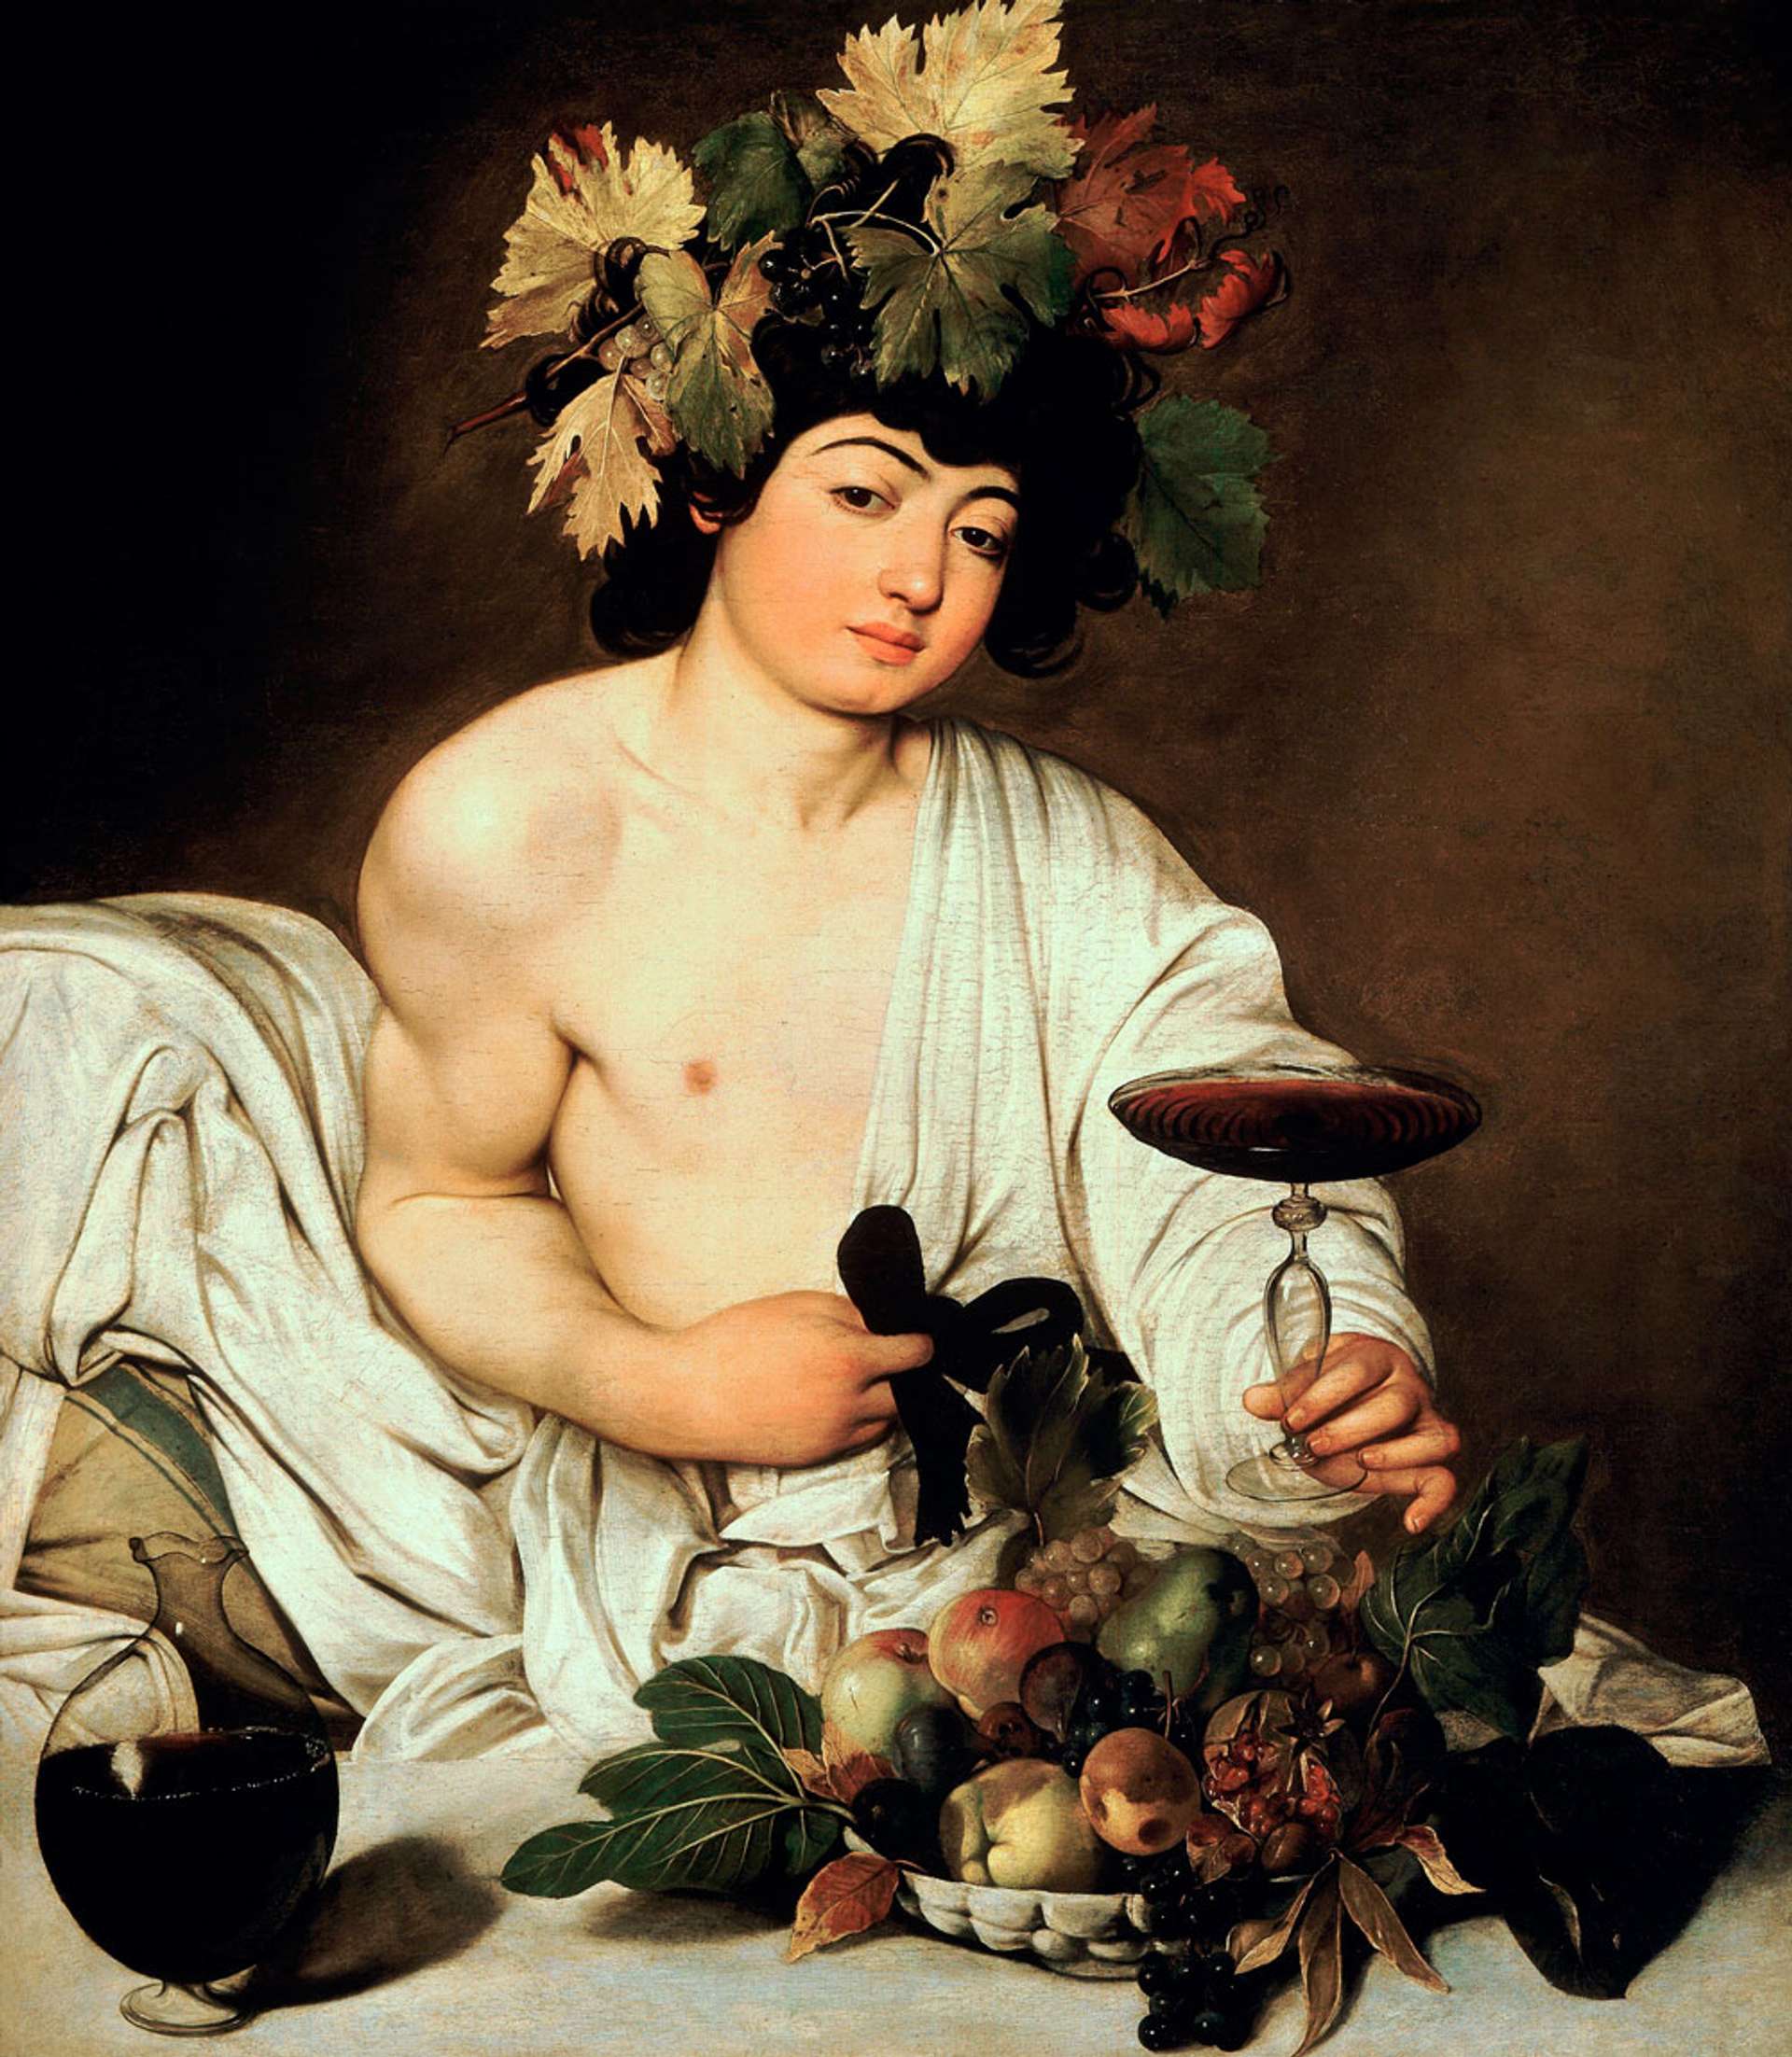 A man half draped in cloth wearing a flora headpiece surrounded by fruit and holding a glass of wine towards the viewer